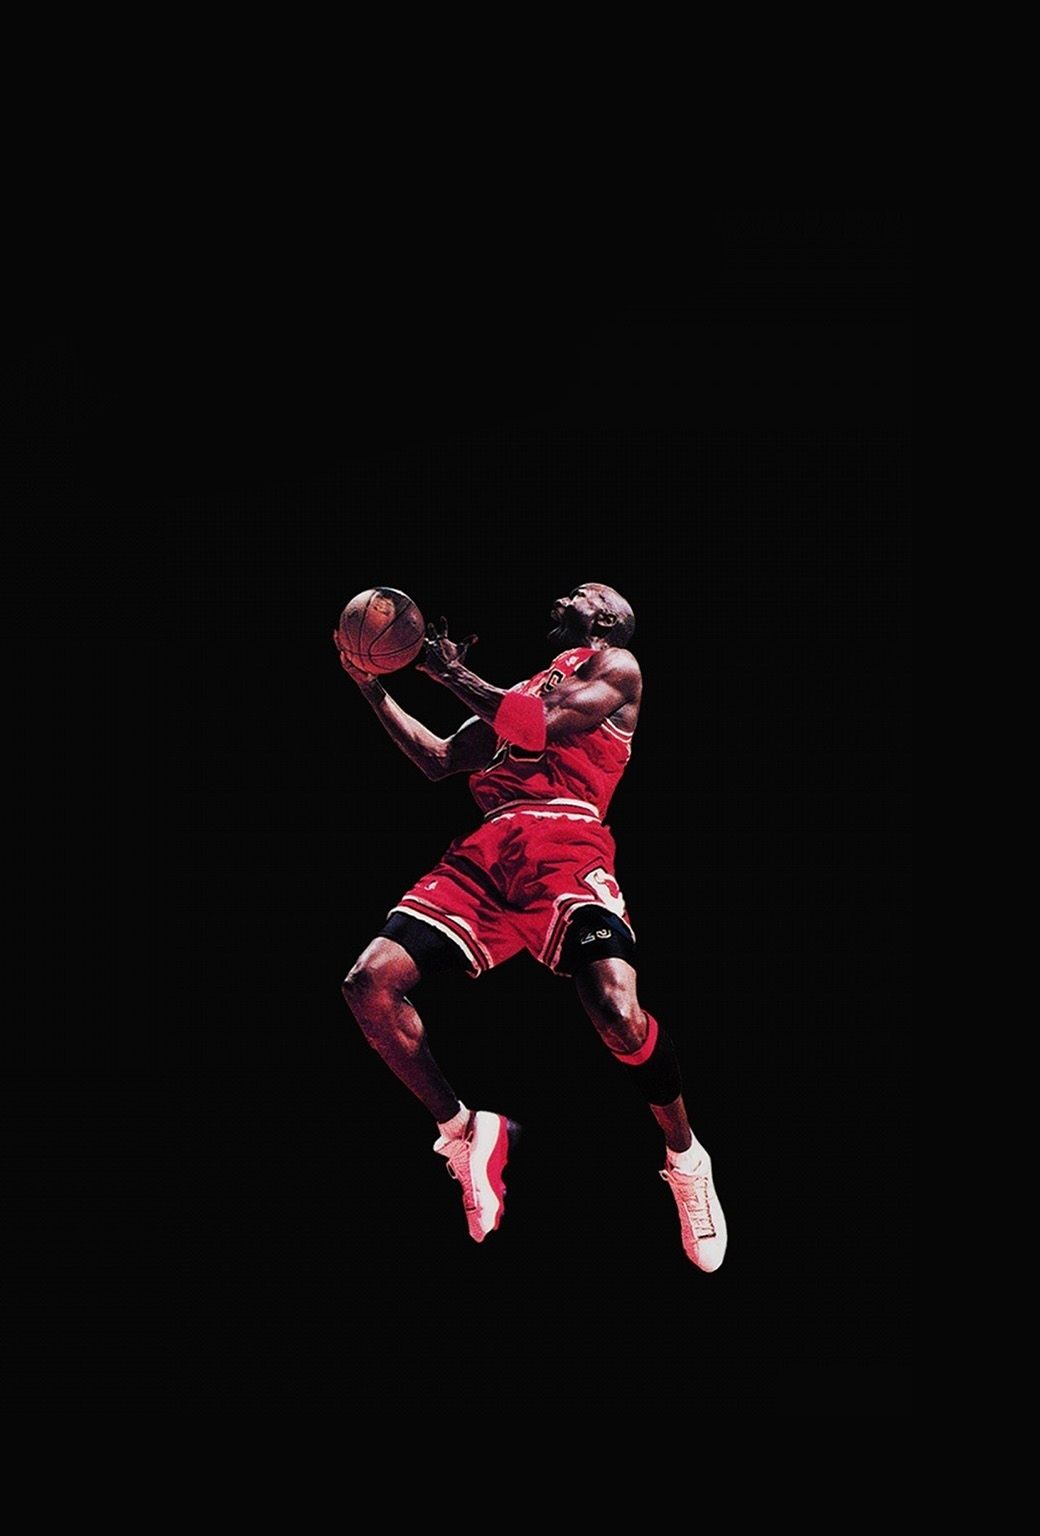 Cool Nike Wallpapers For Iphone 5c | Background Idea